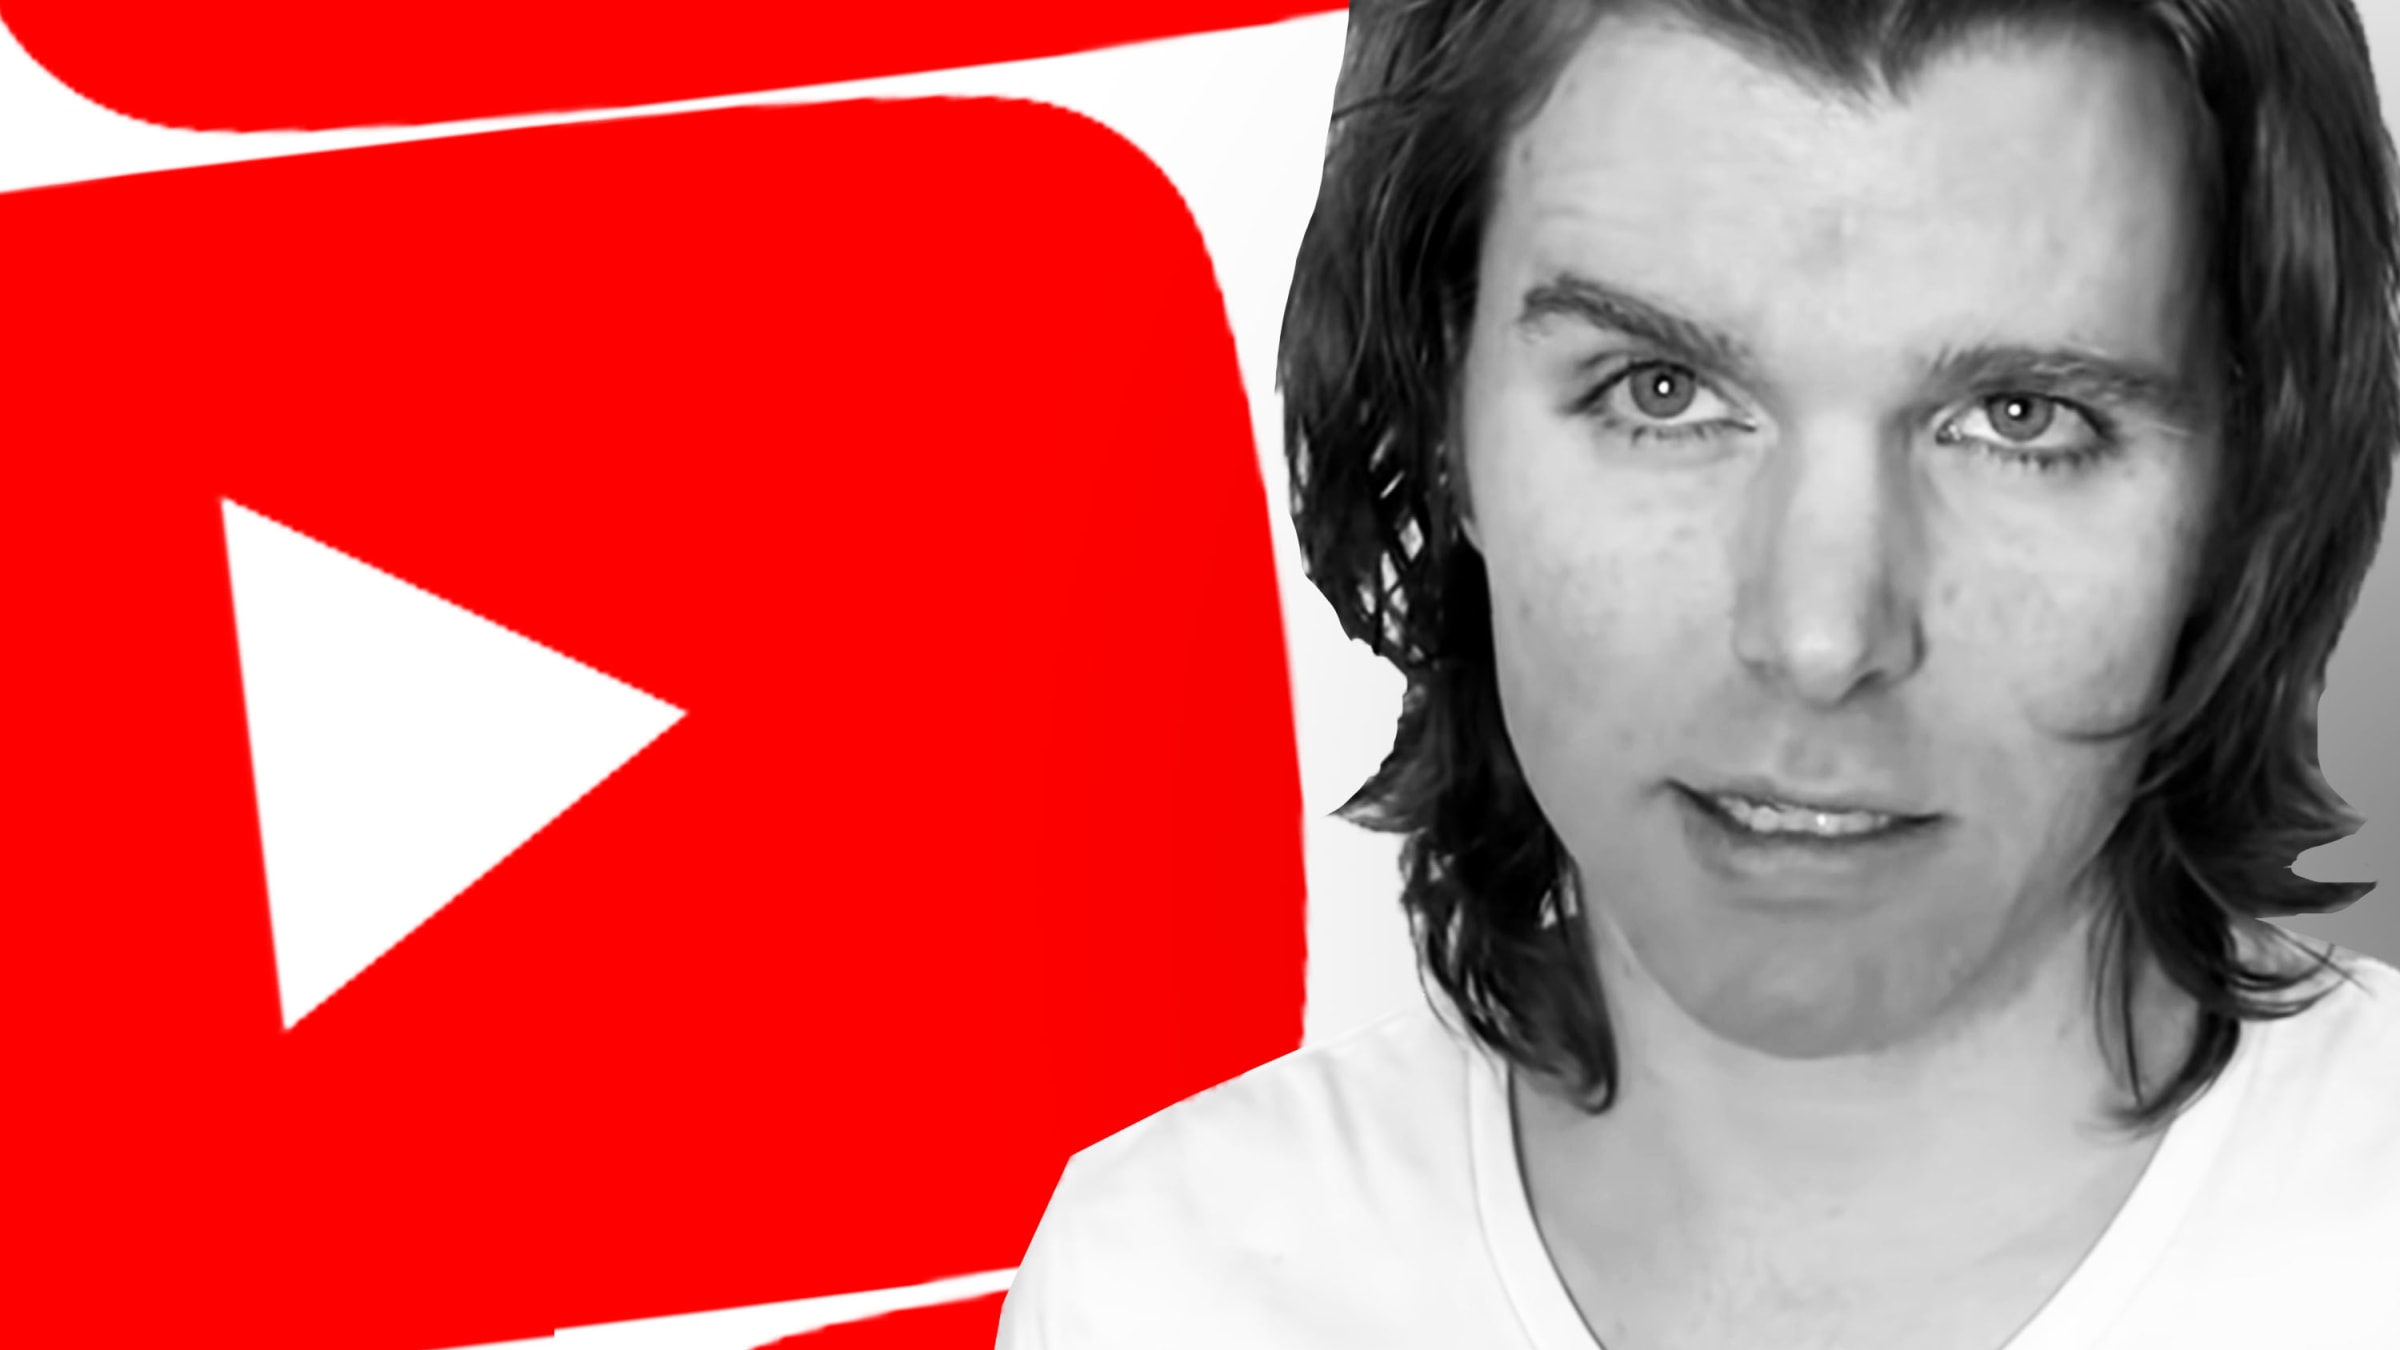 Have a onision kid does Atheist Vegan